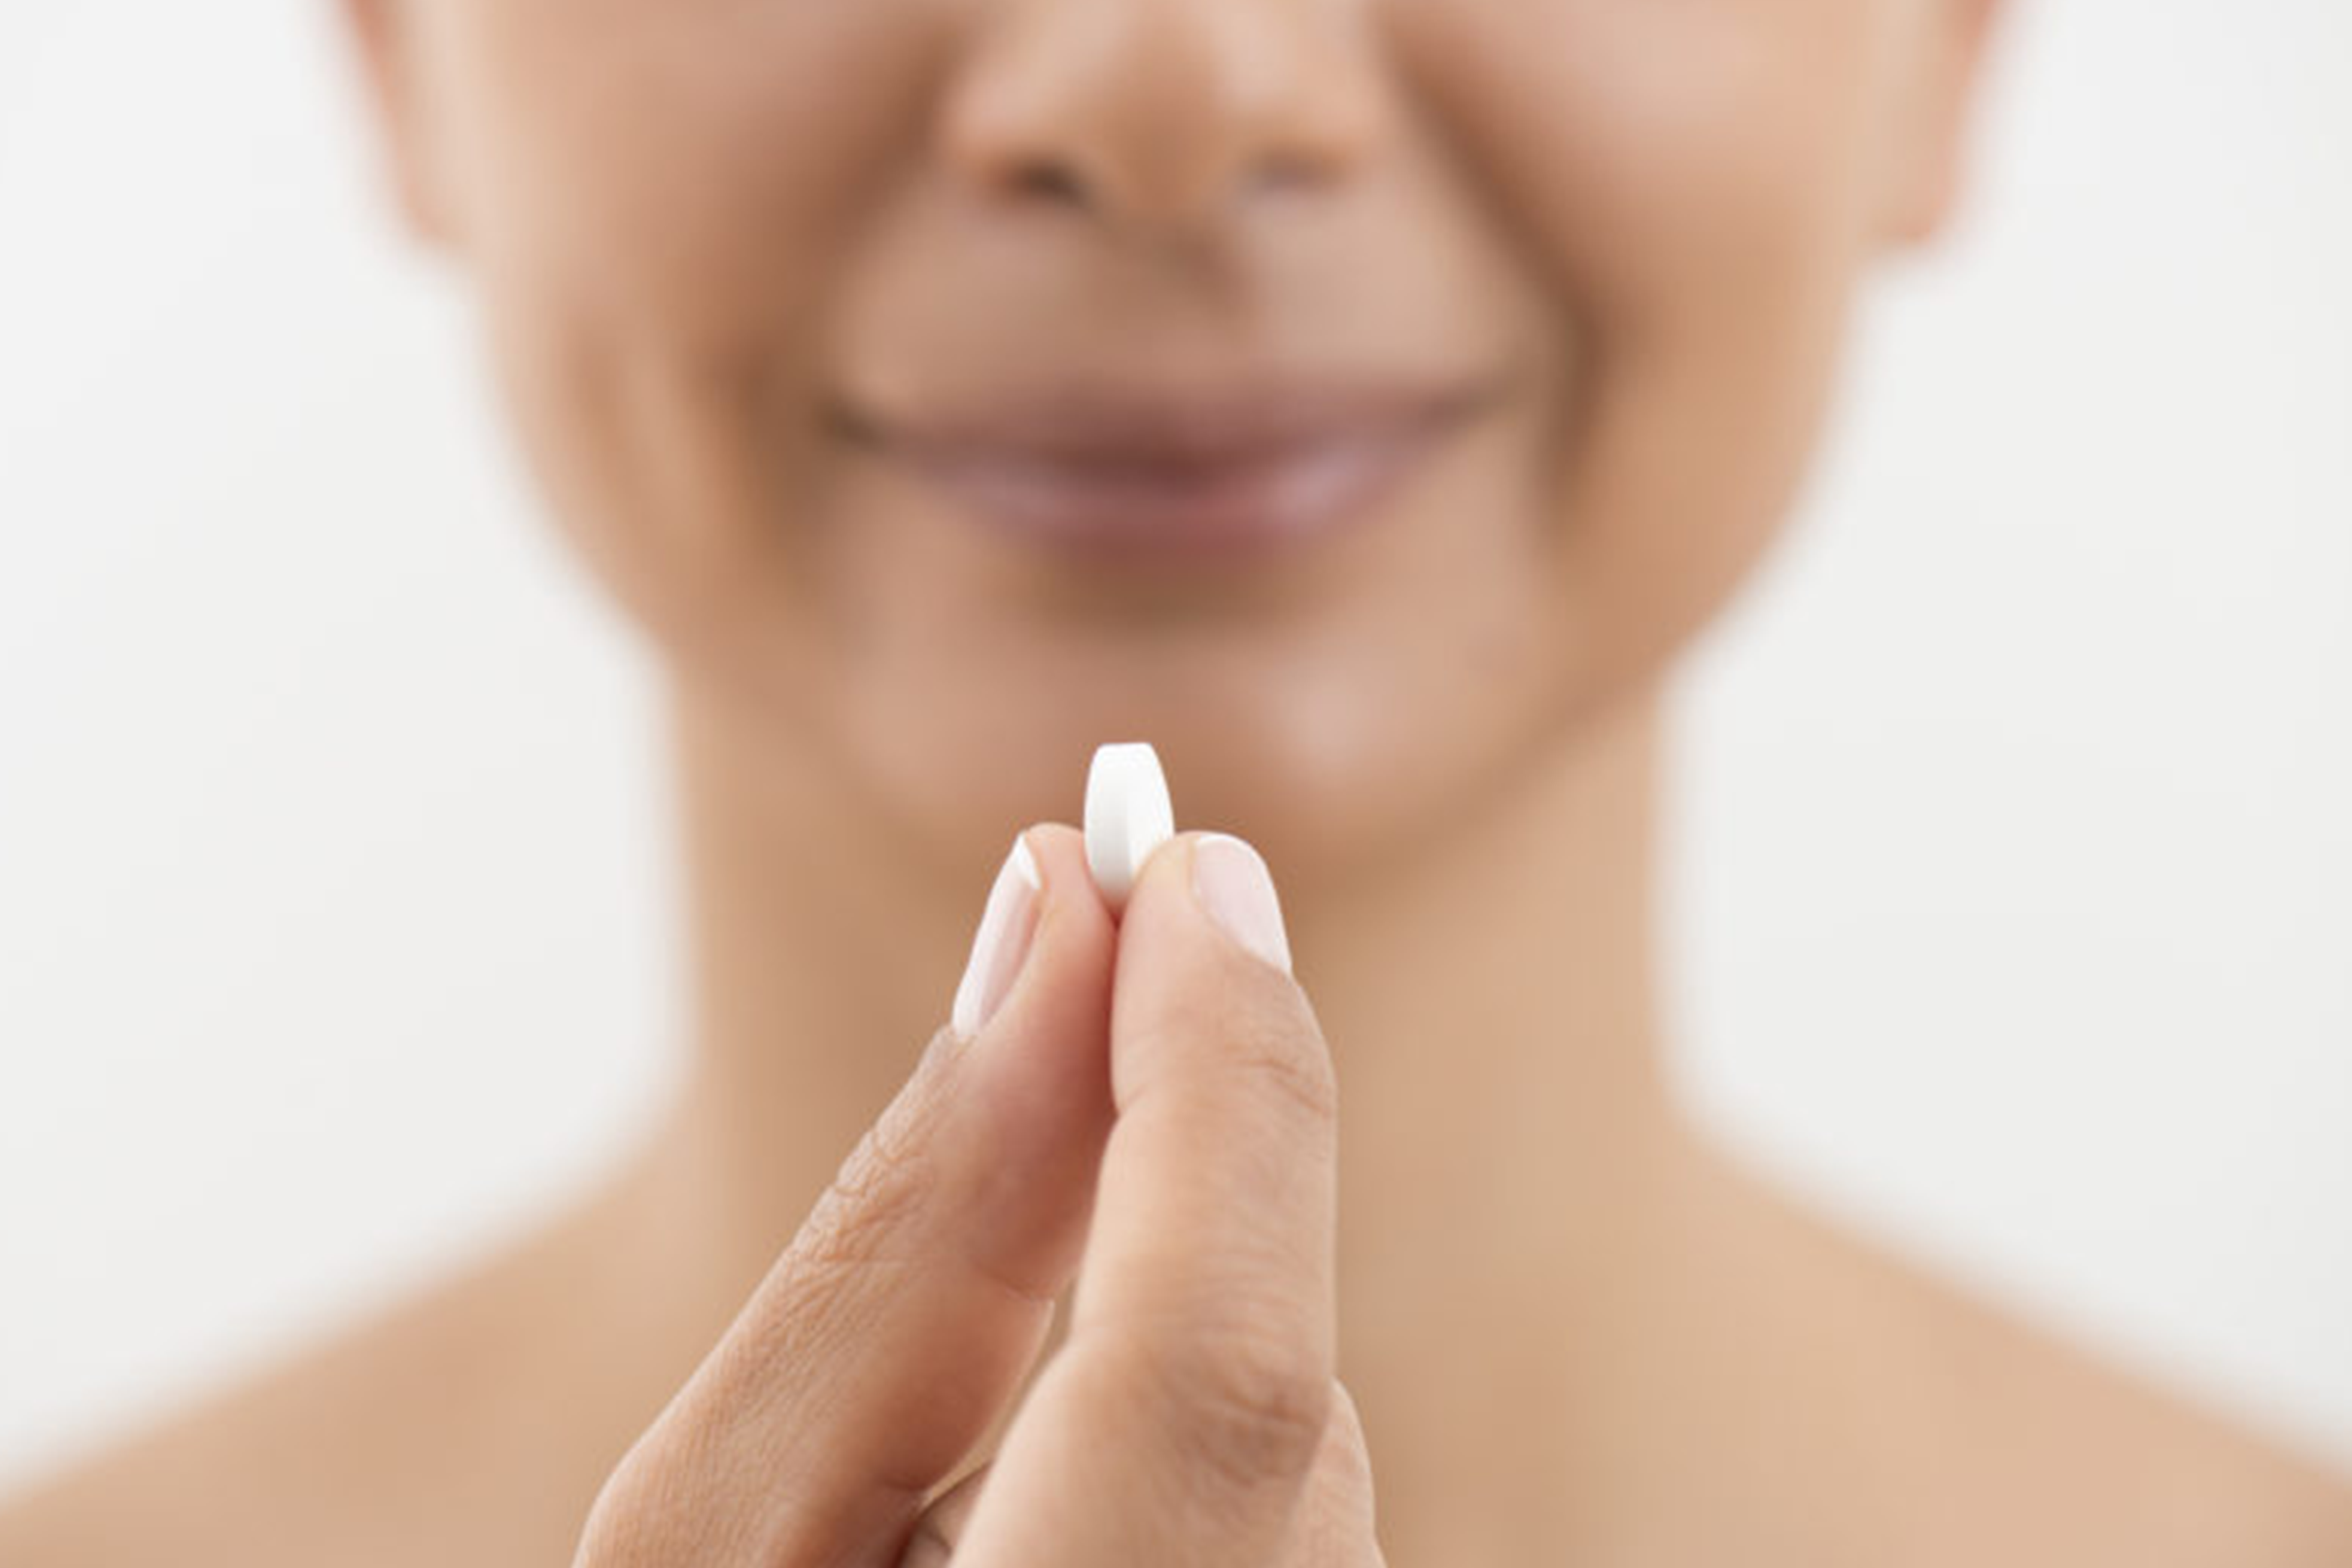 Image of a woman holding a nutrient supplement.